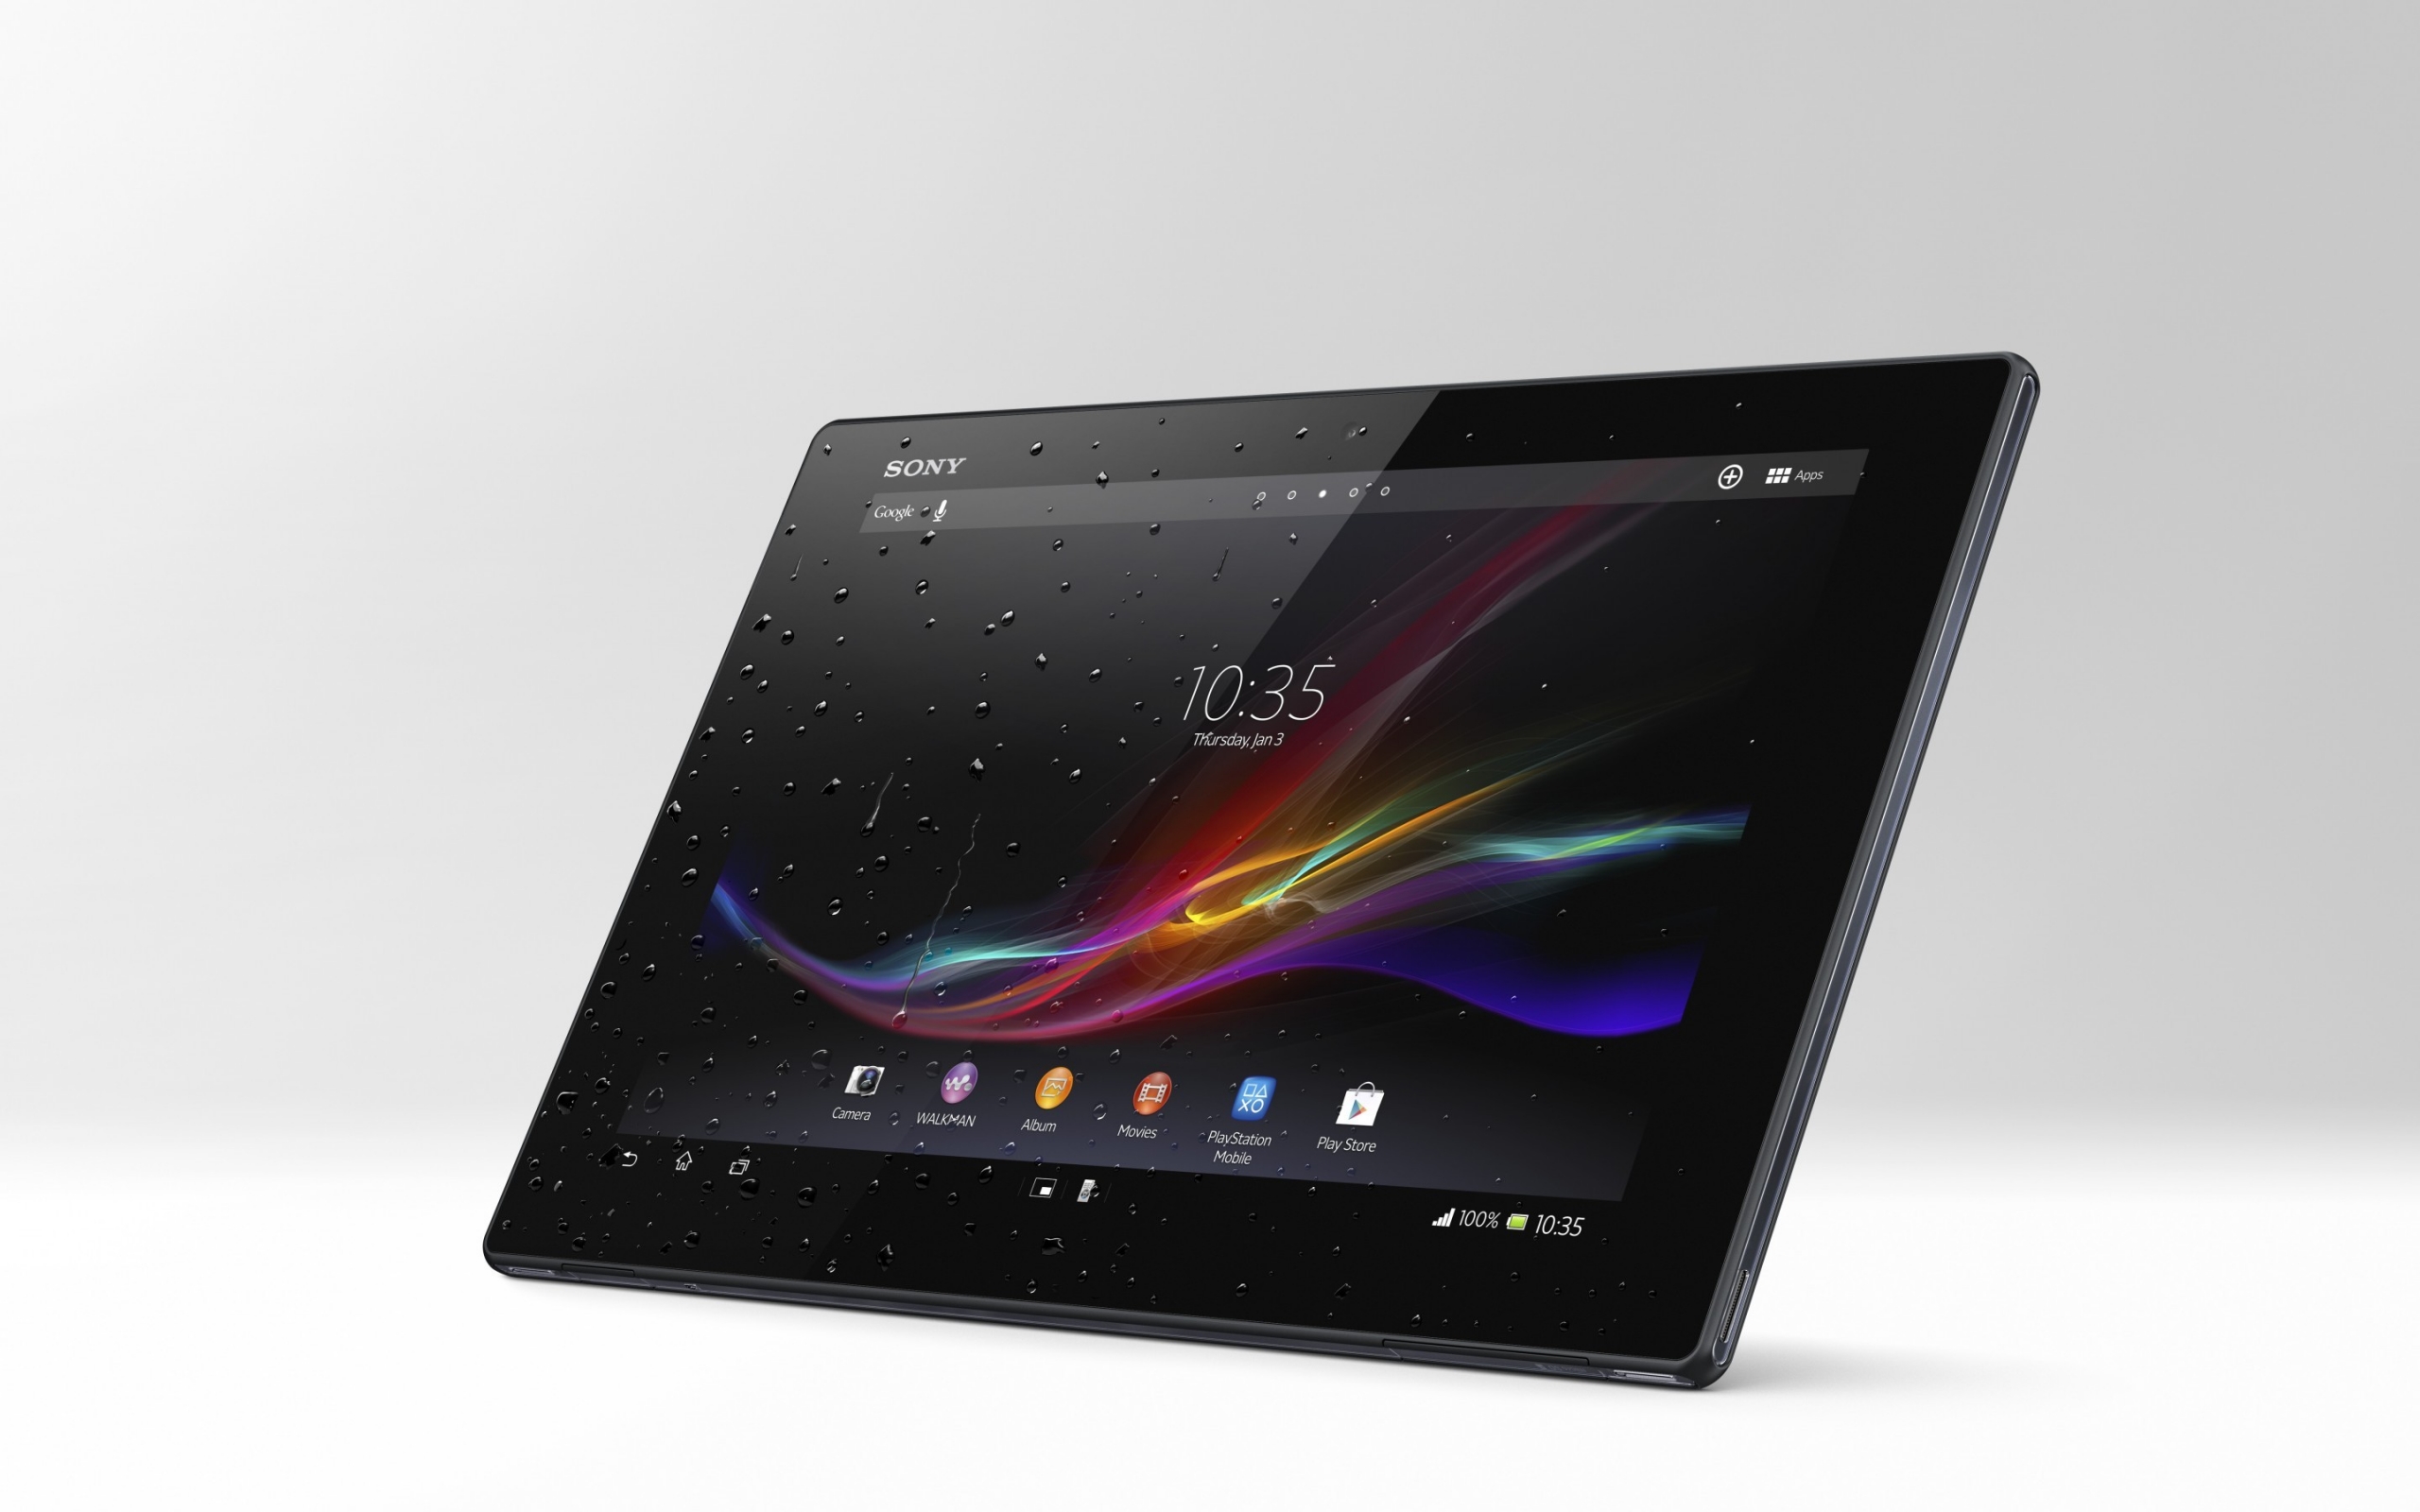 New Sony Xperia Z Tablet for 2560 x 1600 widescreen resolution